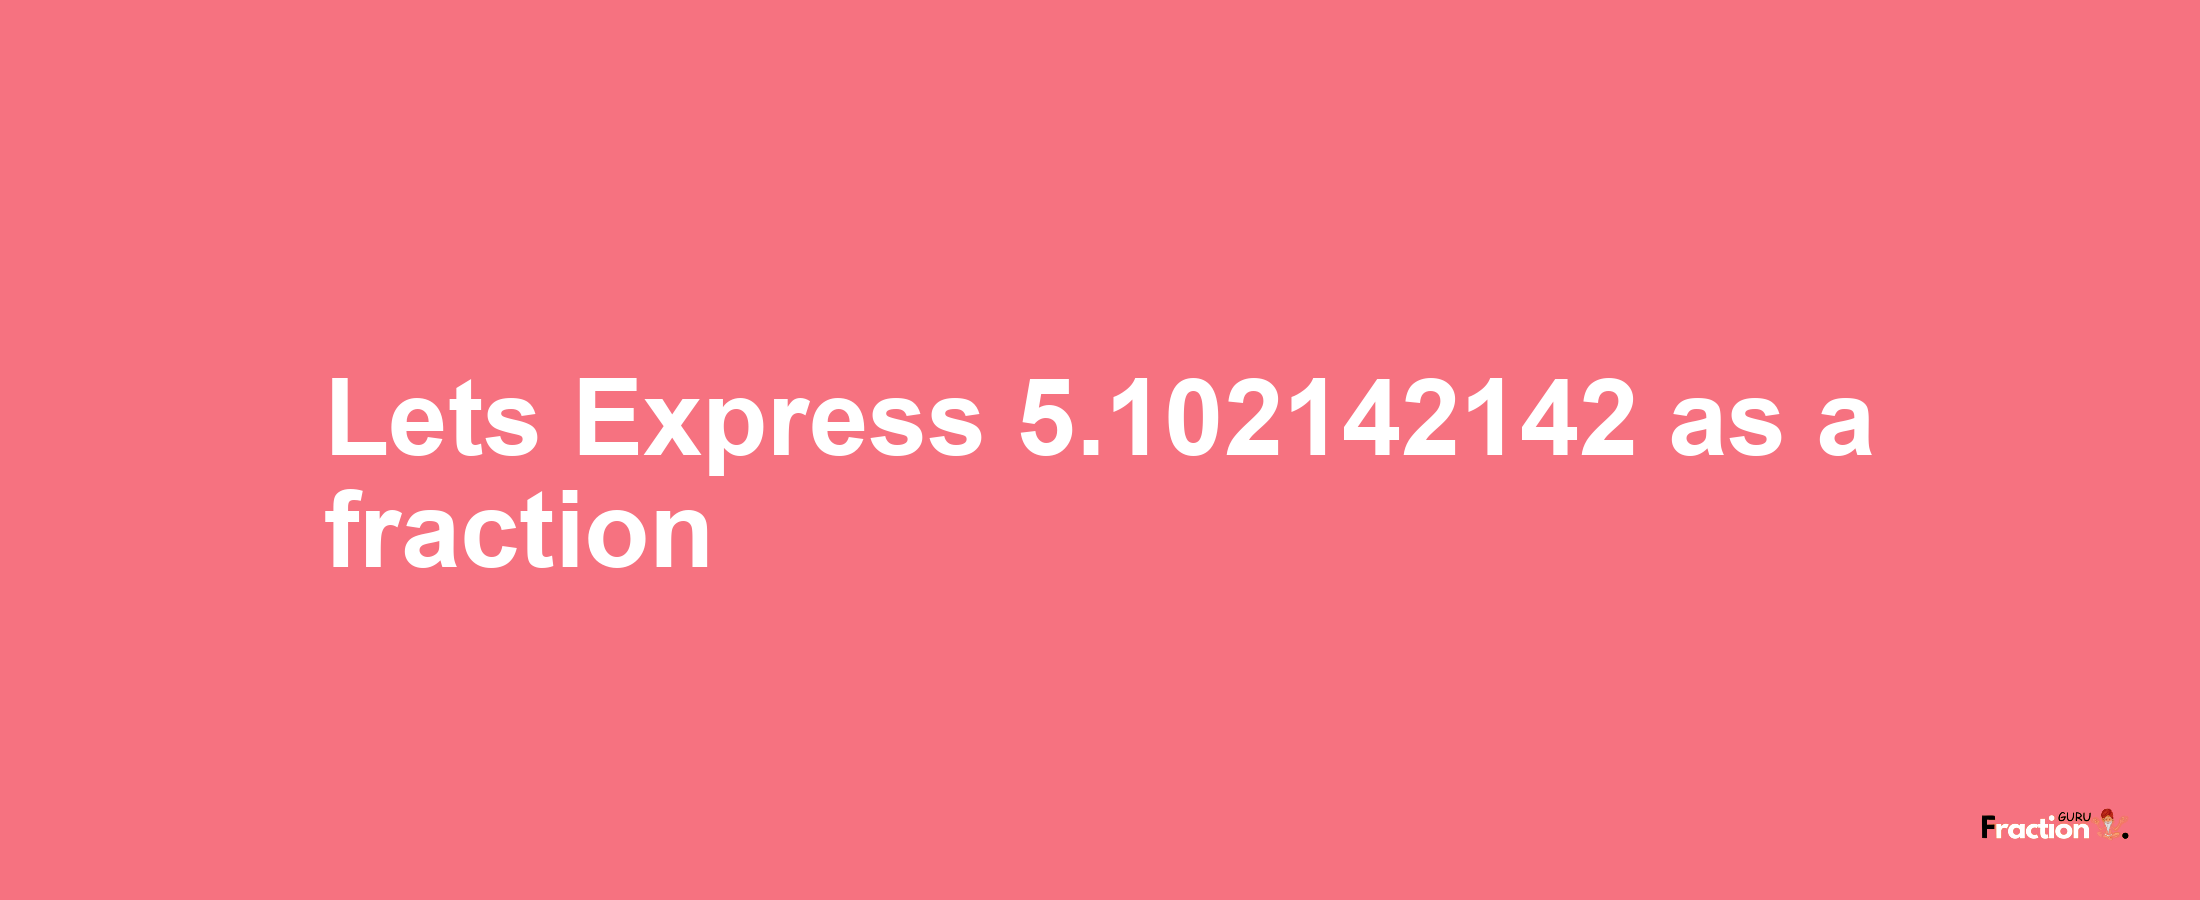 Lets Express 5.102142142 as afraction